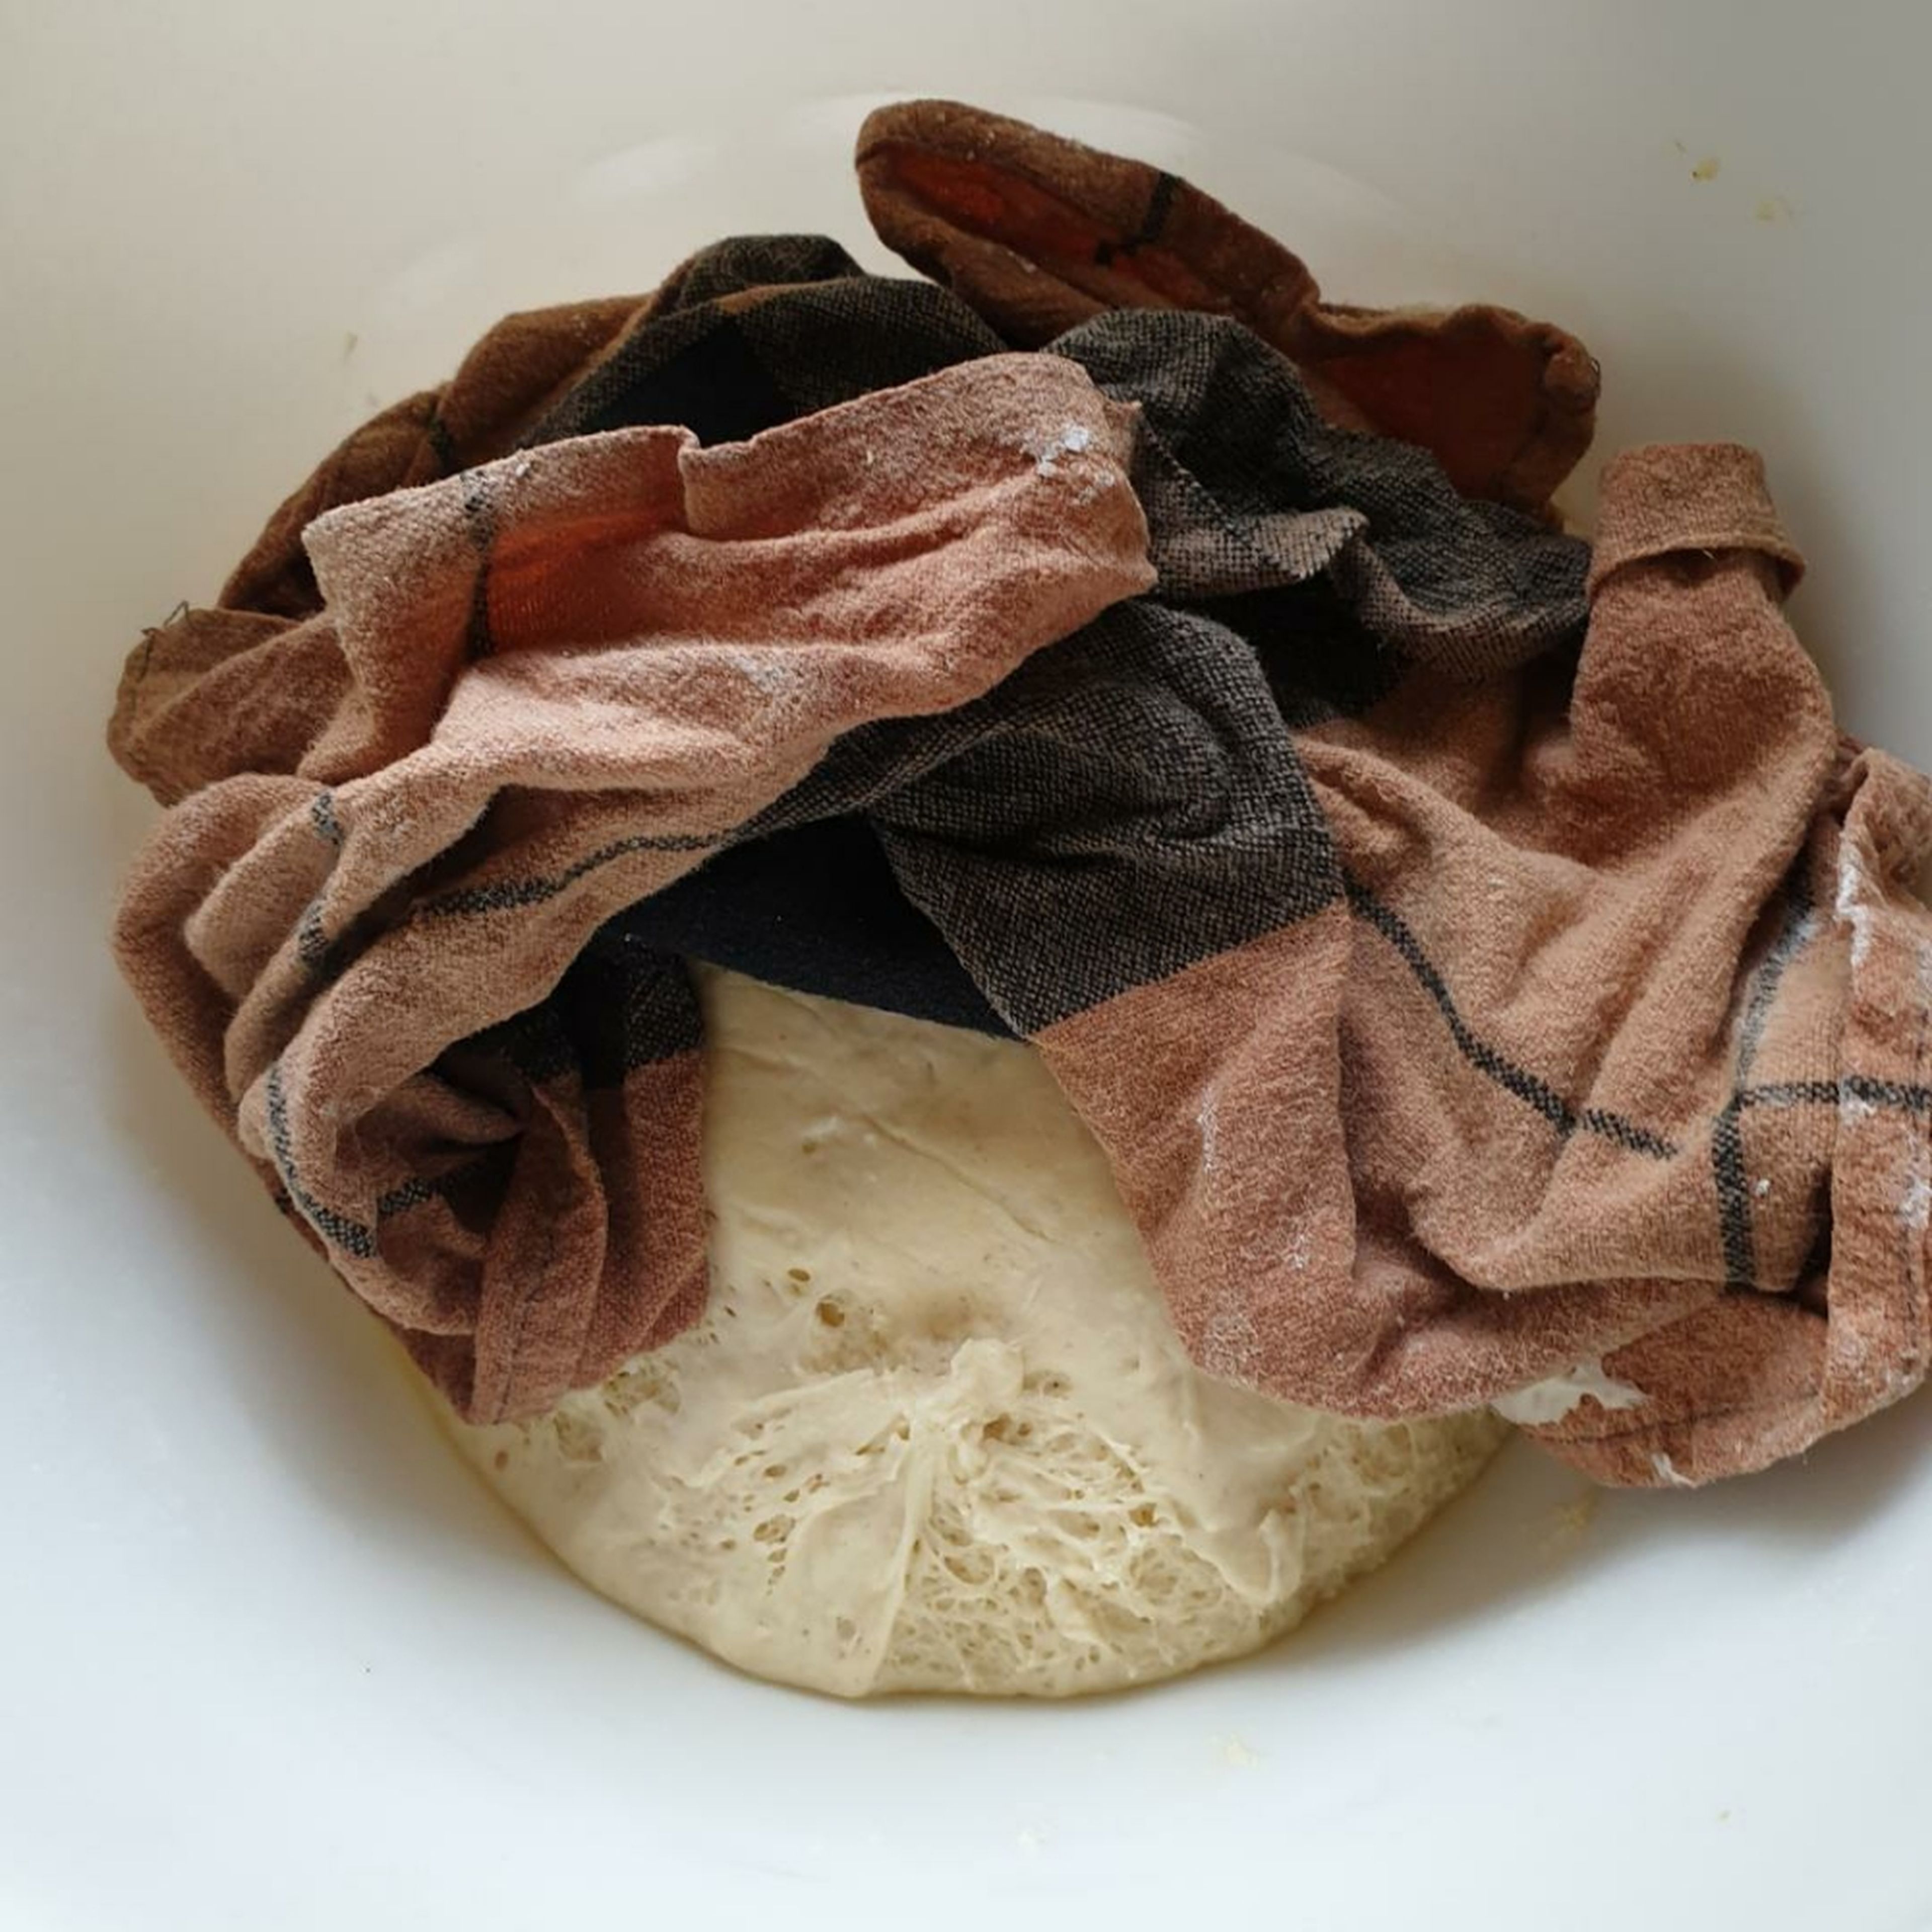 Place the dough in an oiled bowl and cover with a damp cloth. Set aside in a warm and cool place for an hour or till the dough rises.